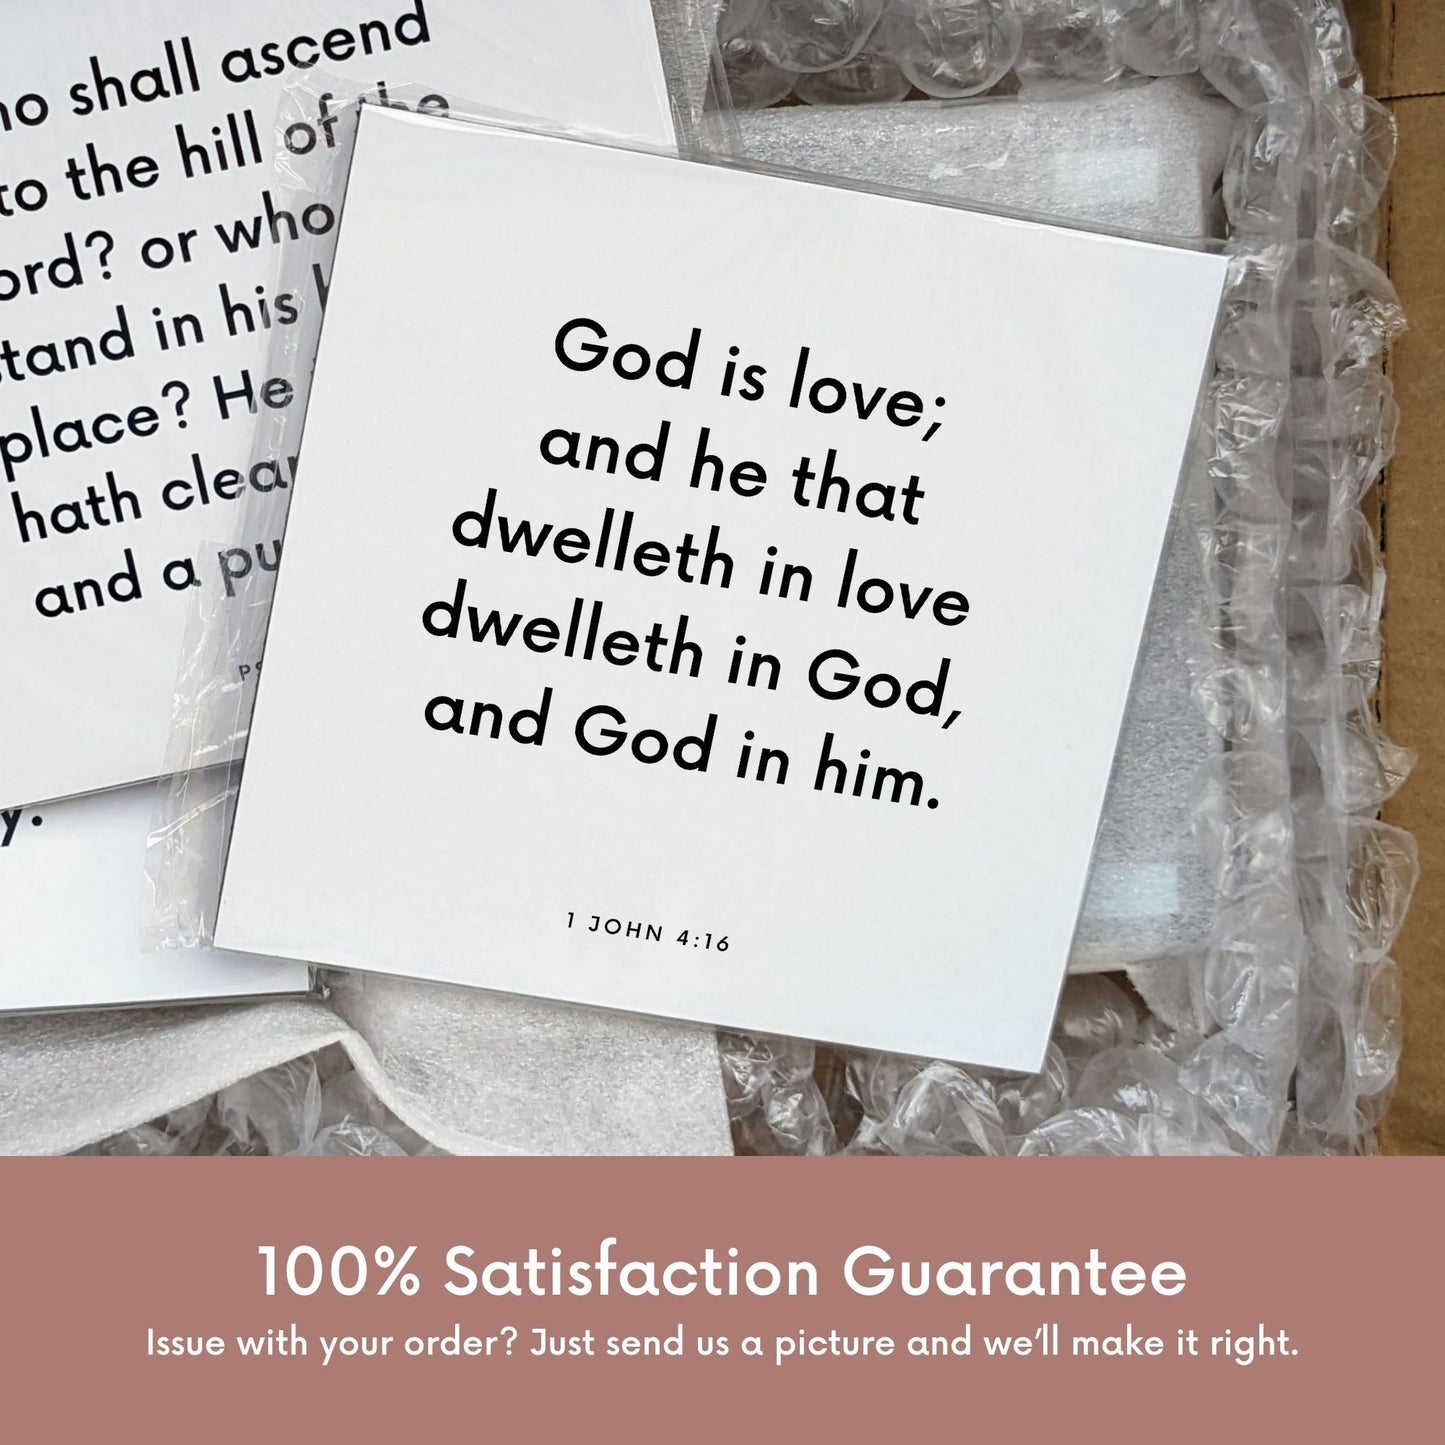 Shipping materials for scripture tile of 1 John 4:16 - "He that dwelleth in love dwelleth in God"